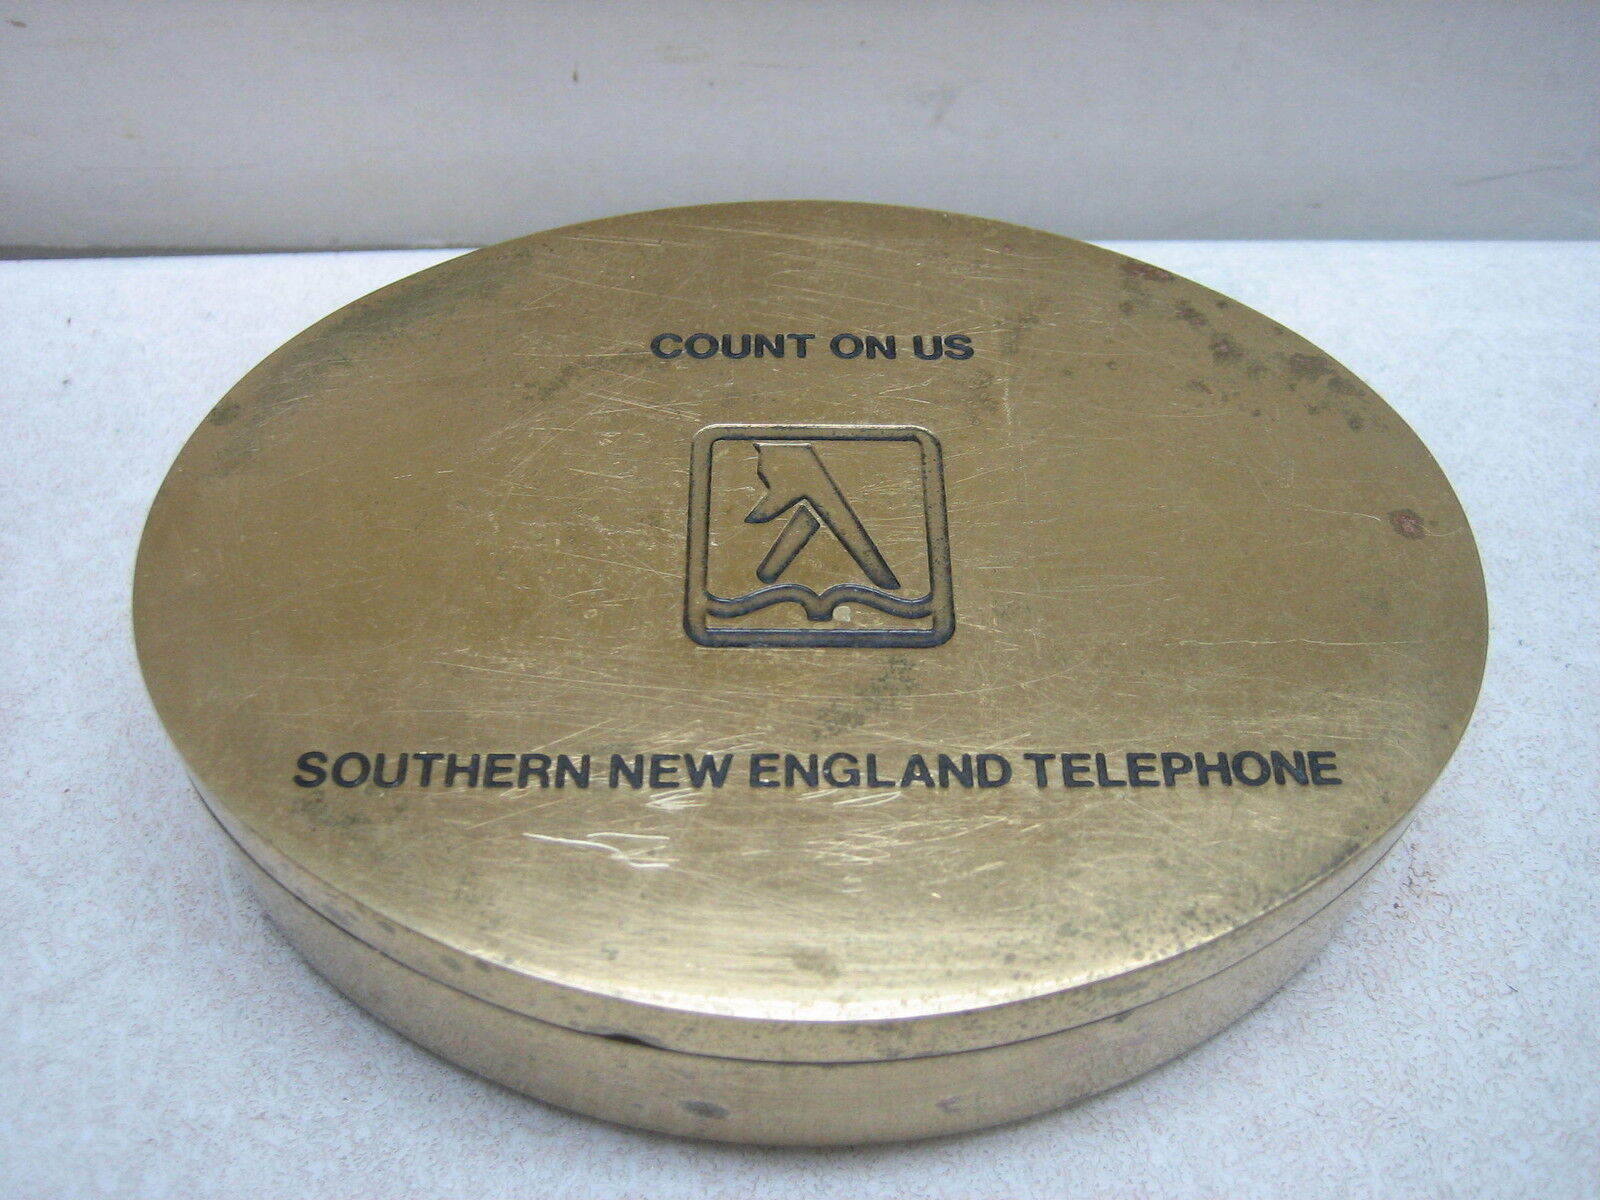 VINT ADVERTISING SOUTHERN NEW ENGLAND TELEPHONE YELLOW PAGES BRASS TRINKET BOX